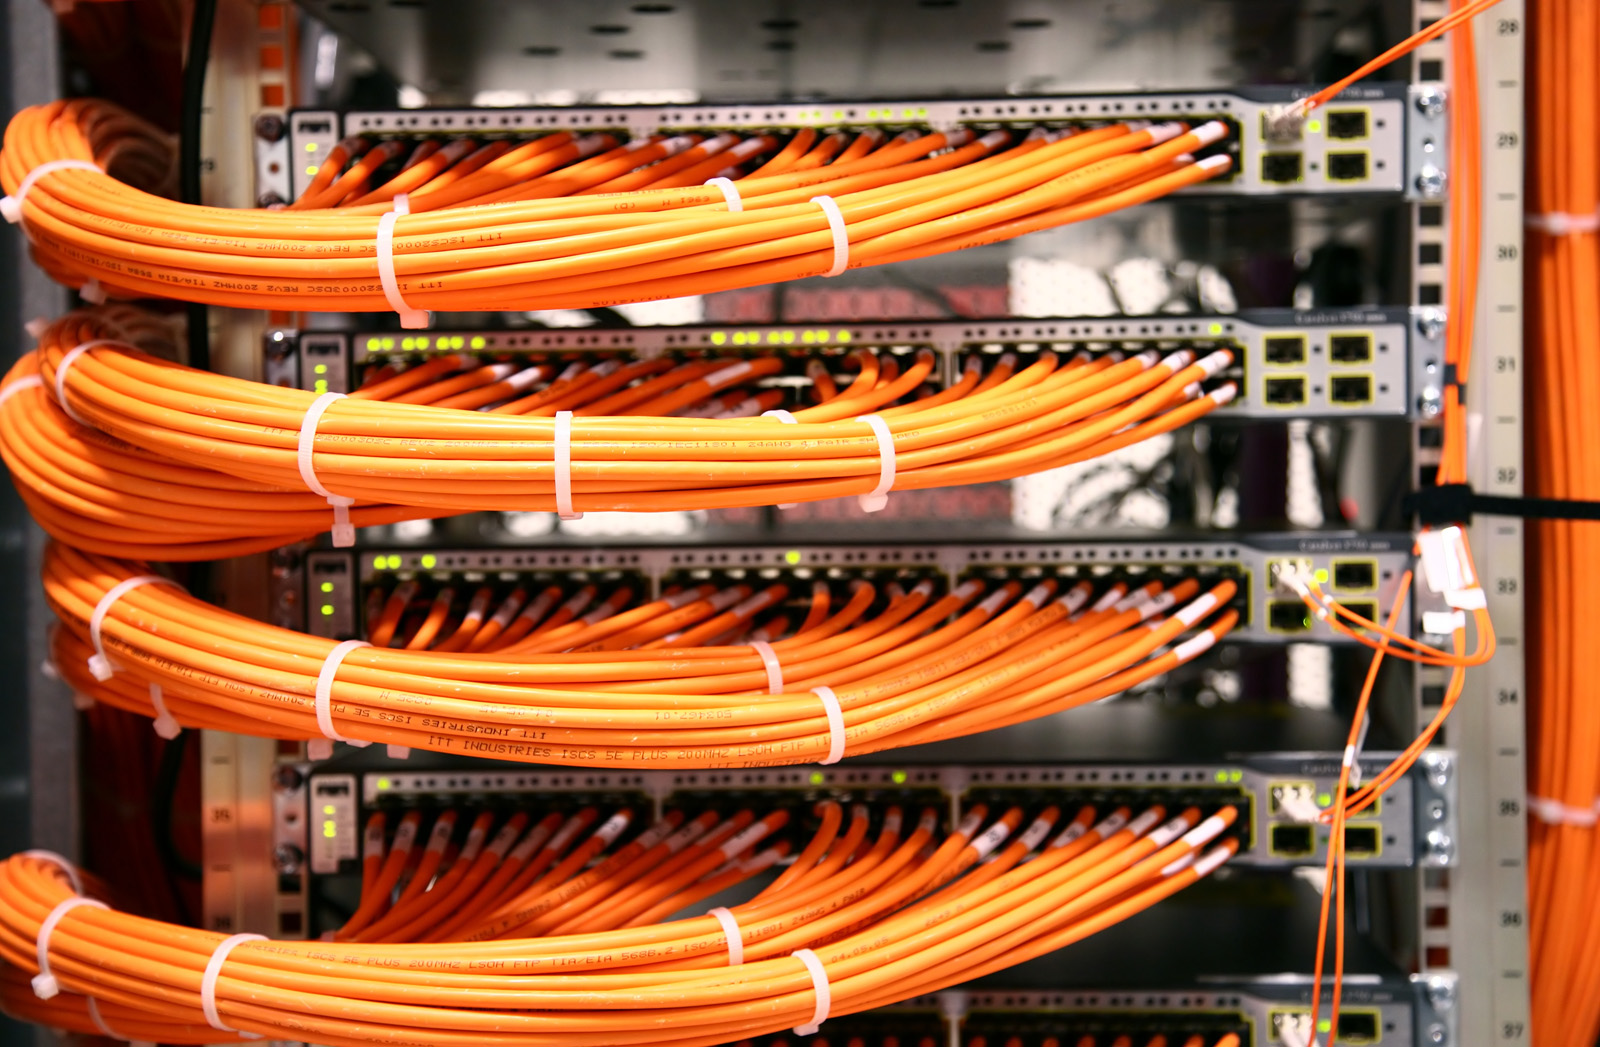 Jenkins Kentucky Superior Voice & Data Network Cabling Contractor